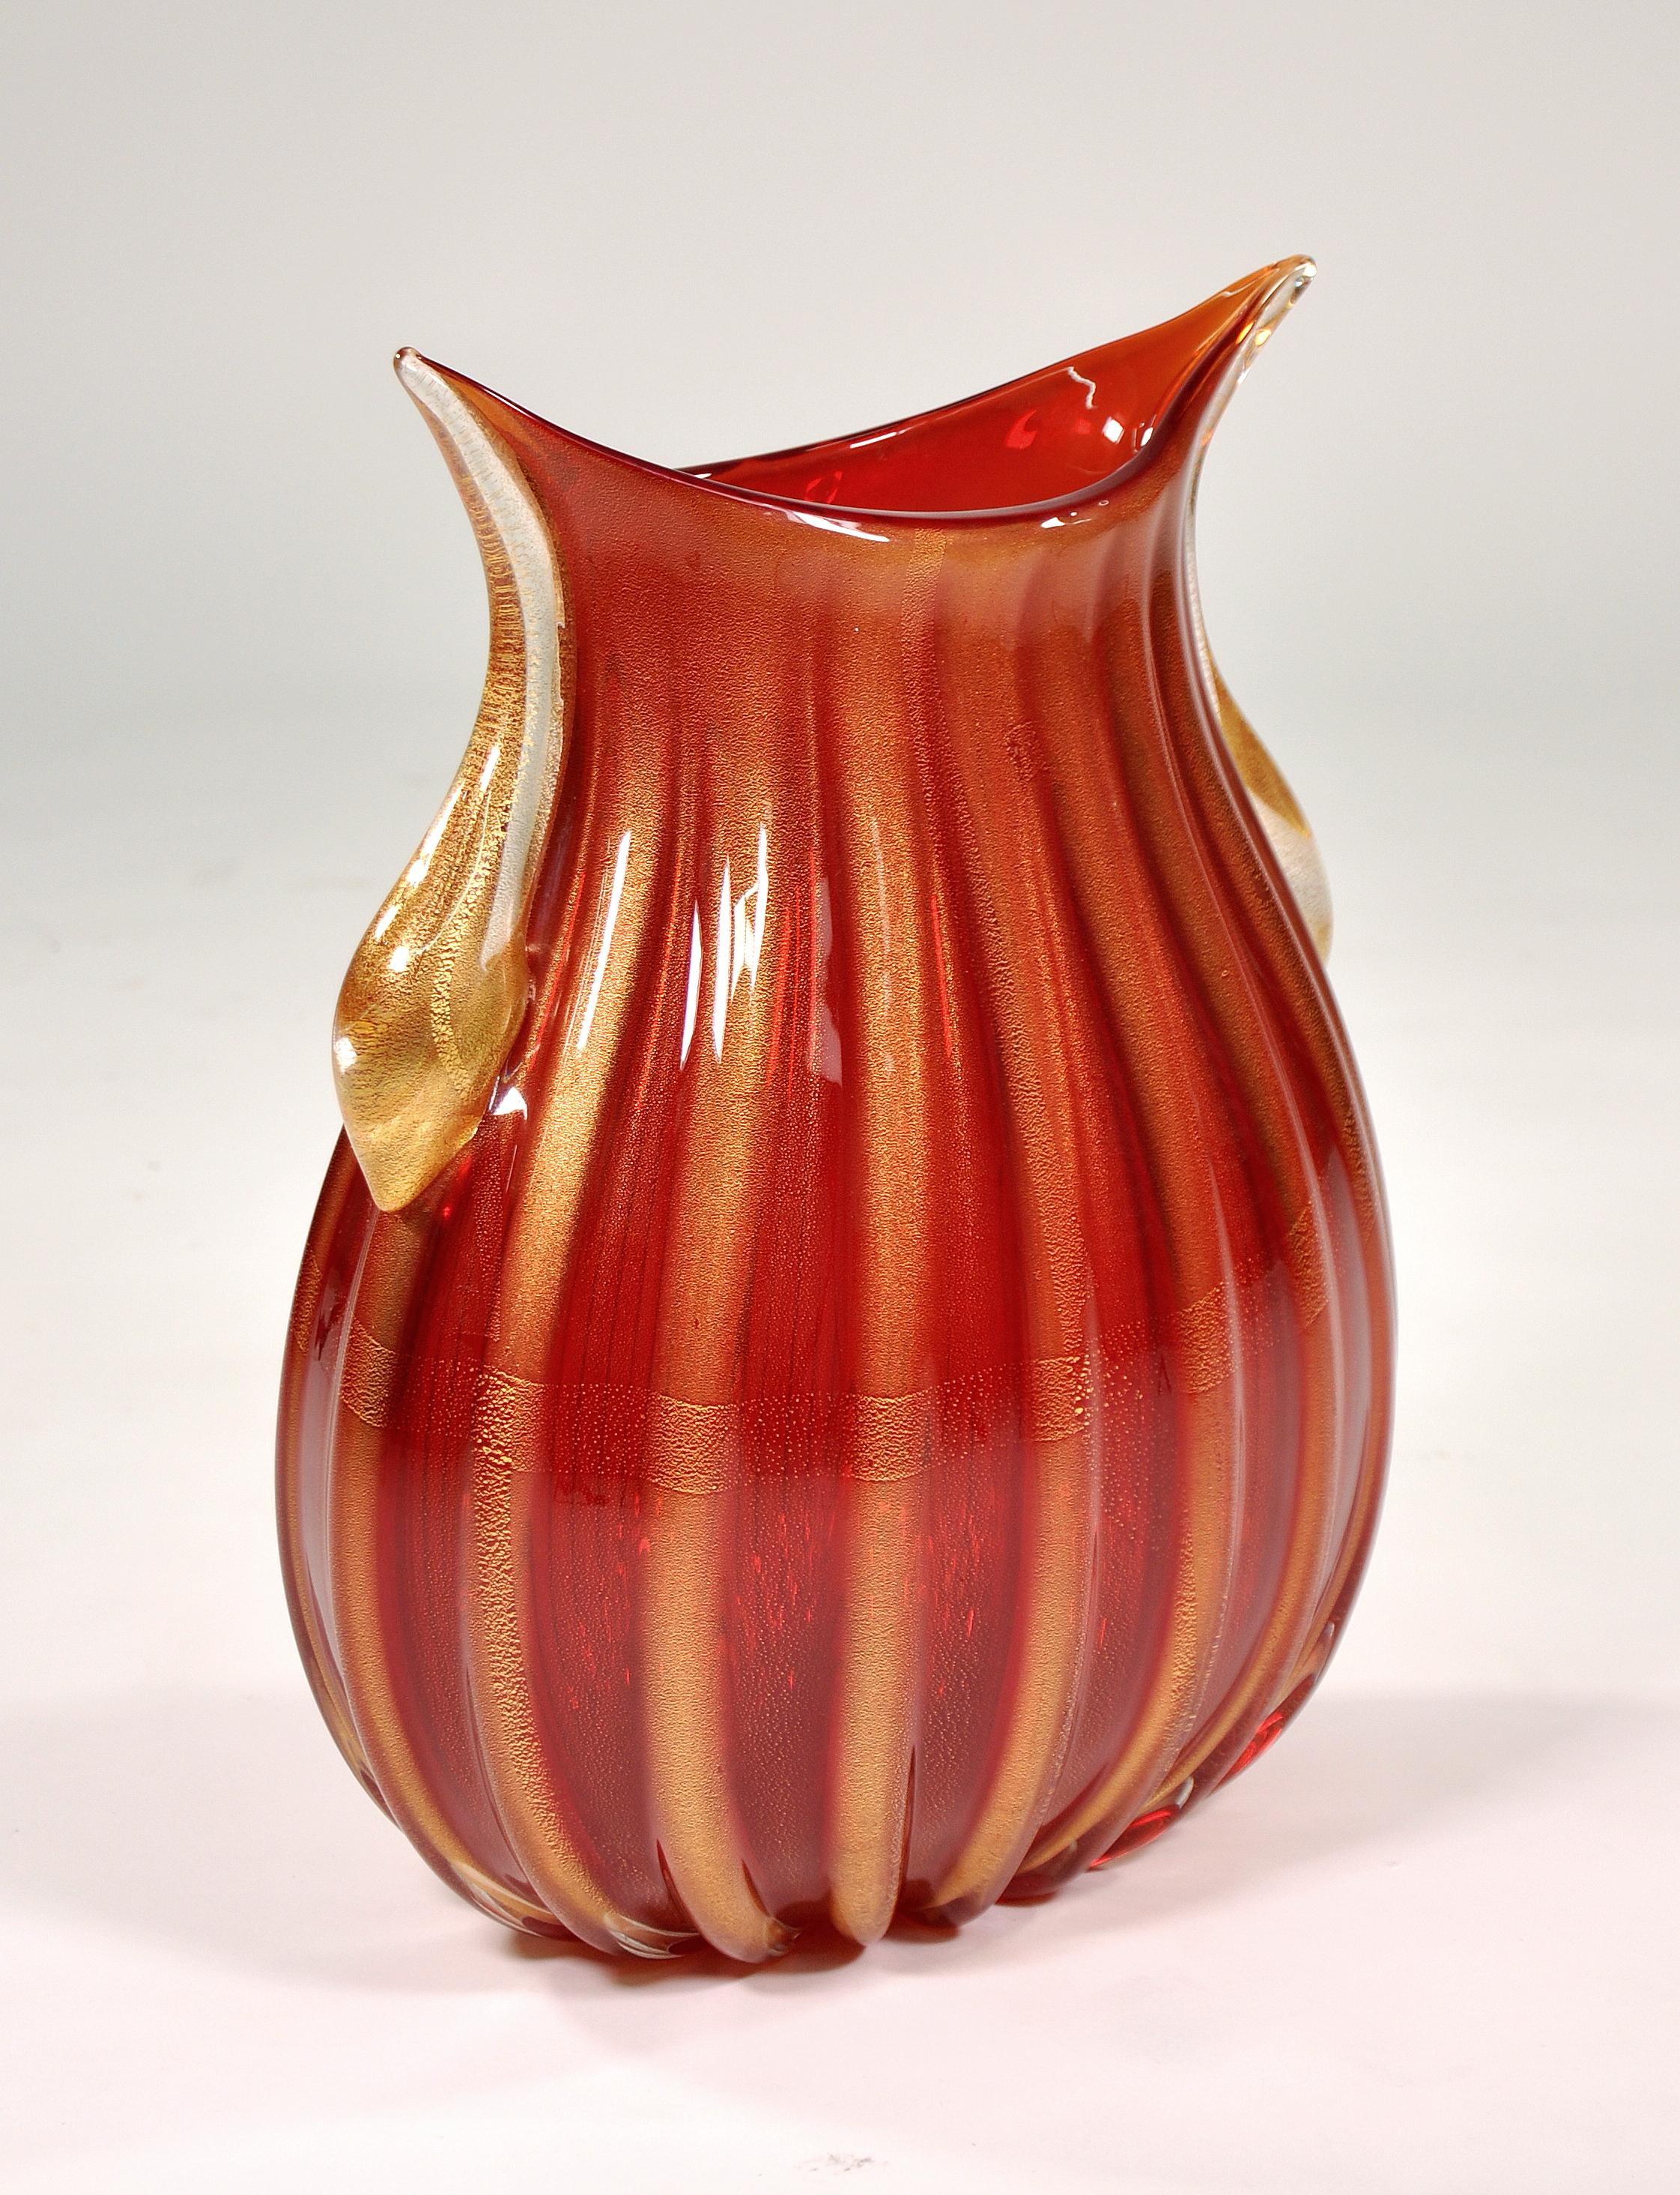 Large Pino Signoretto Red and Gold Murano Glass Vase, 1960s For Sale 1